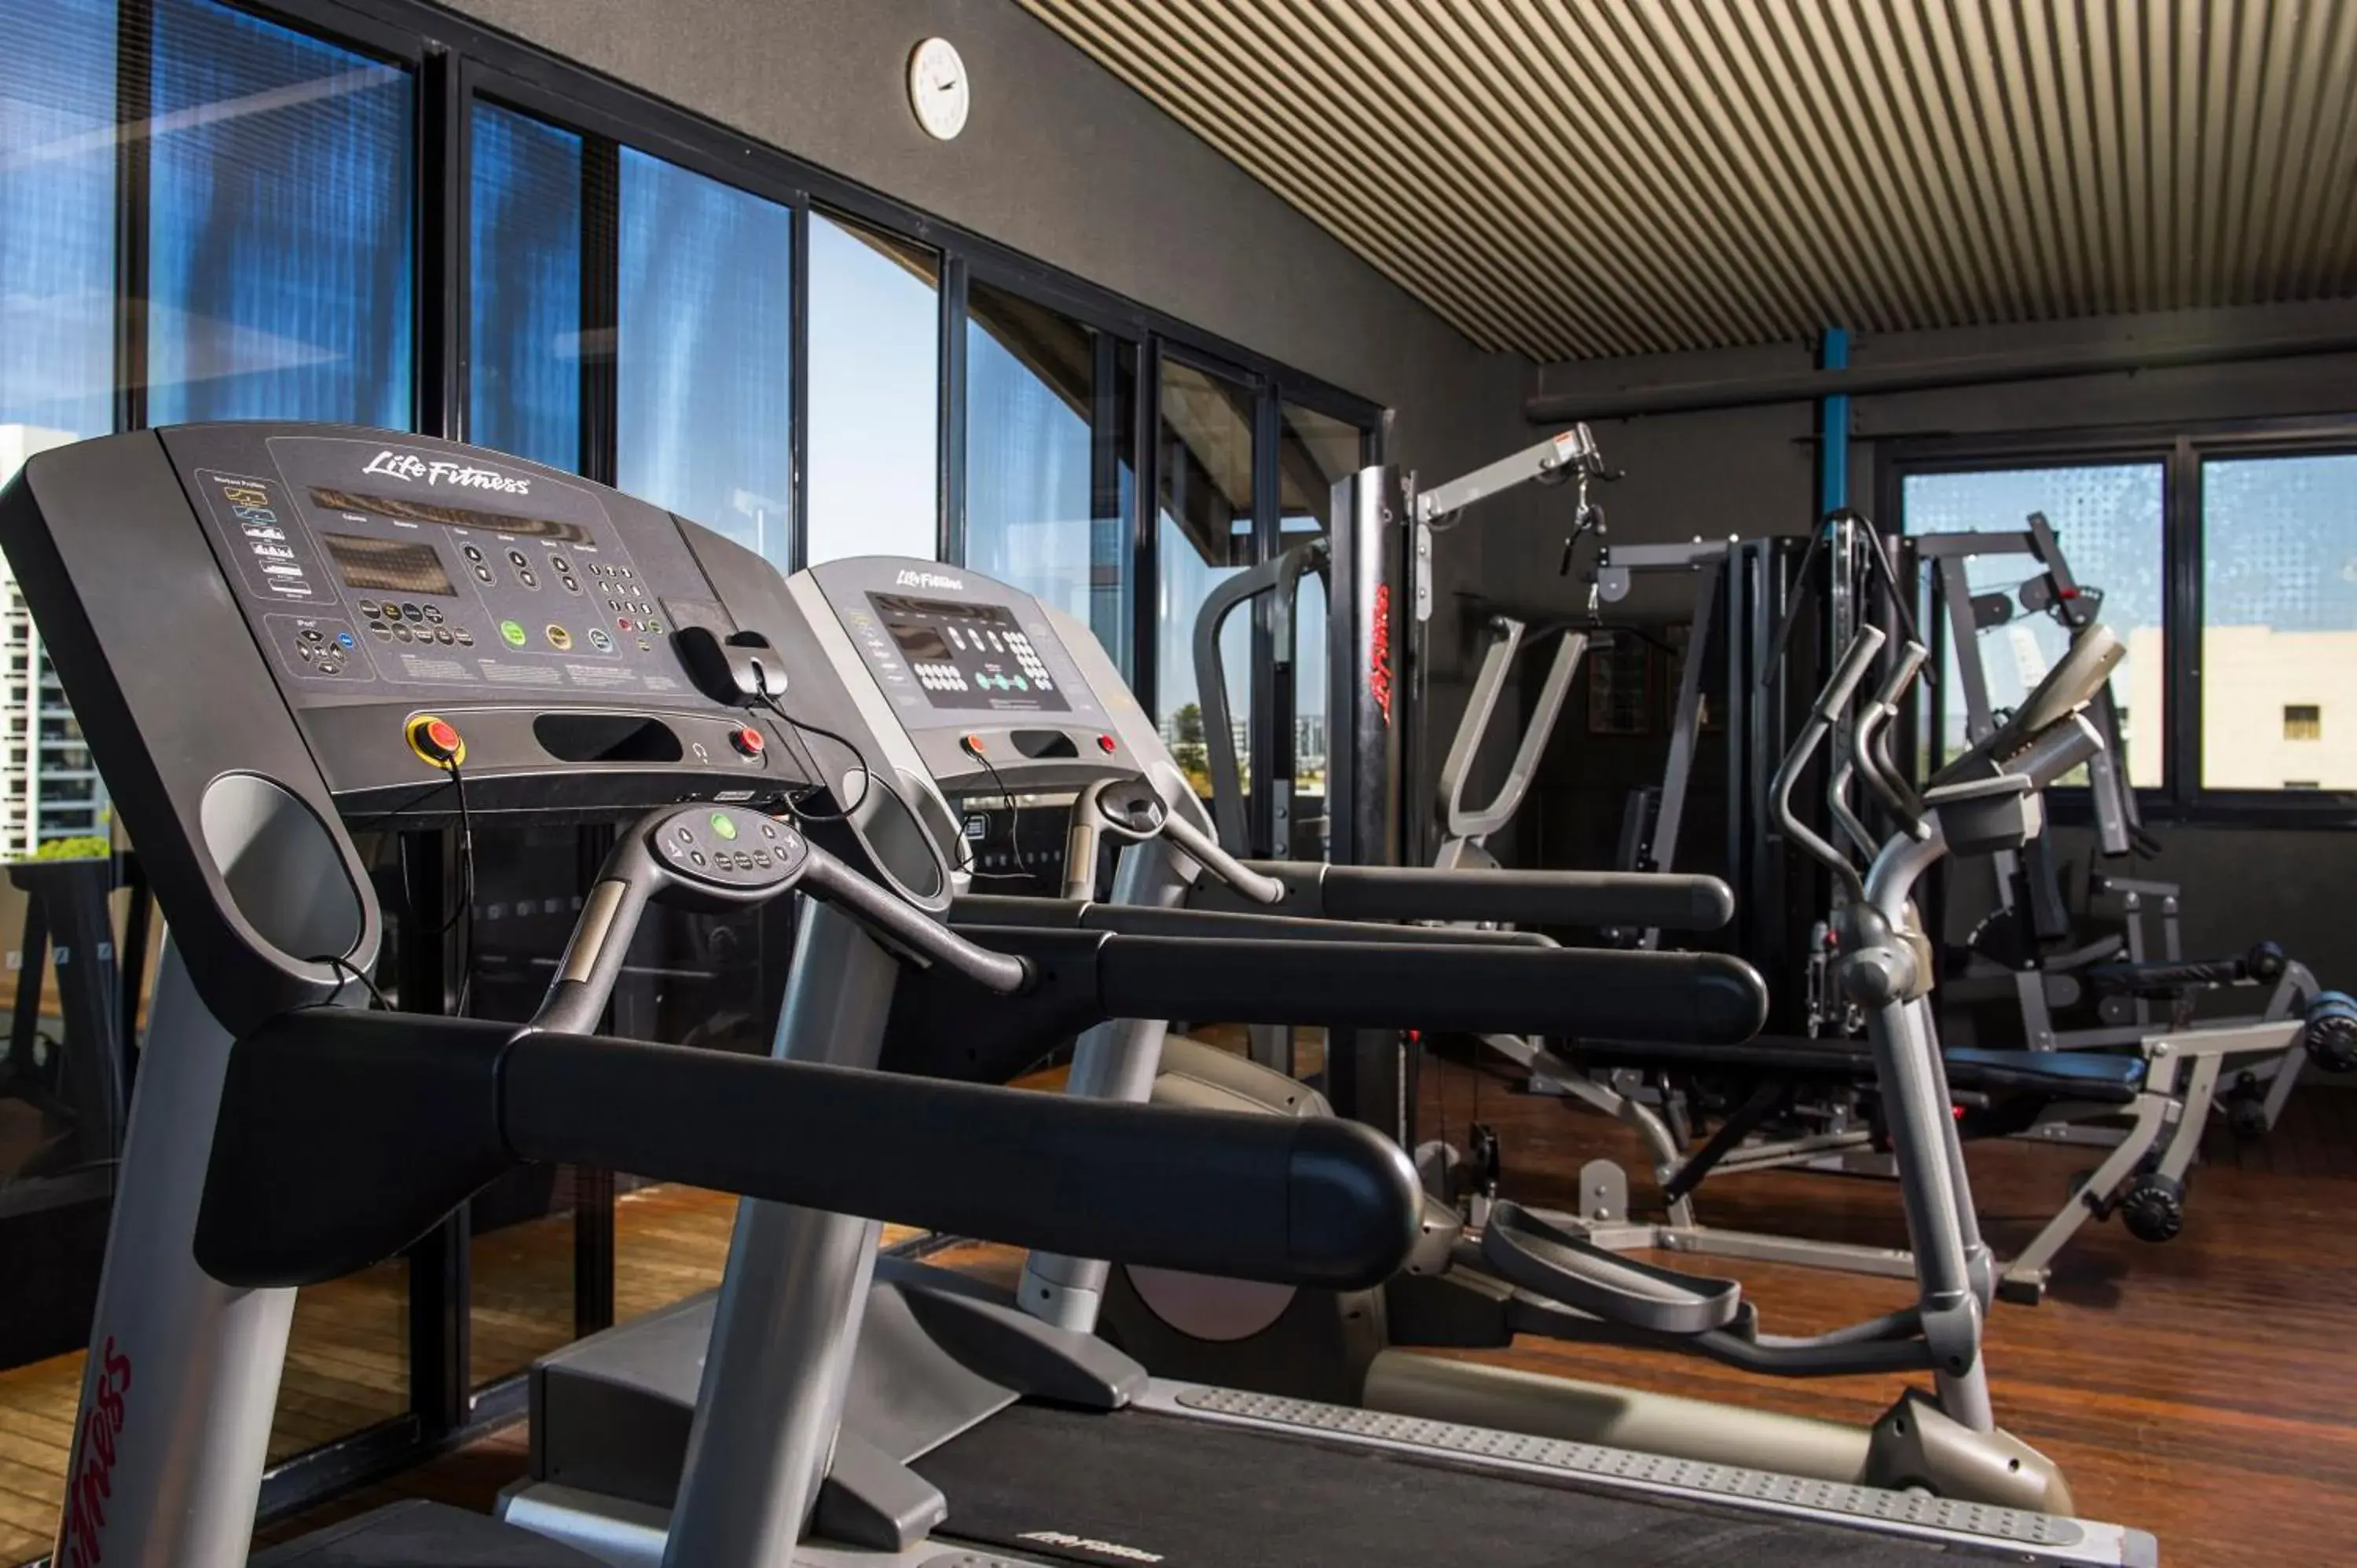 Fitness centre/facilities, Fitness Center/Facilities in Mantra on Hay Perth